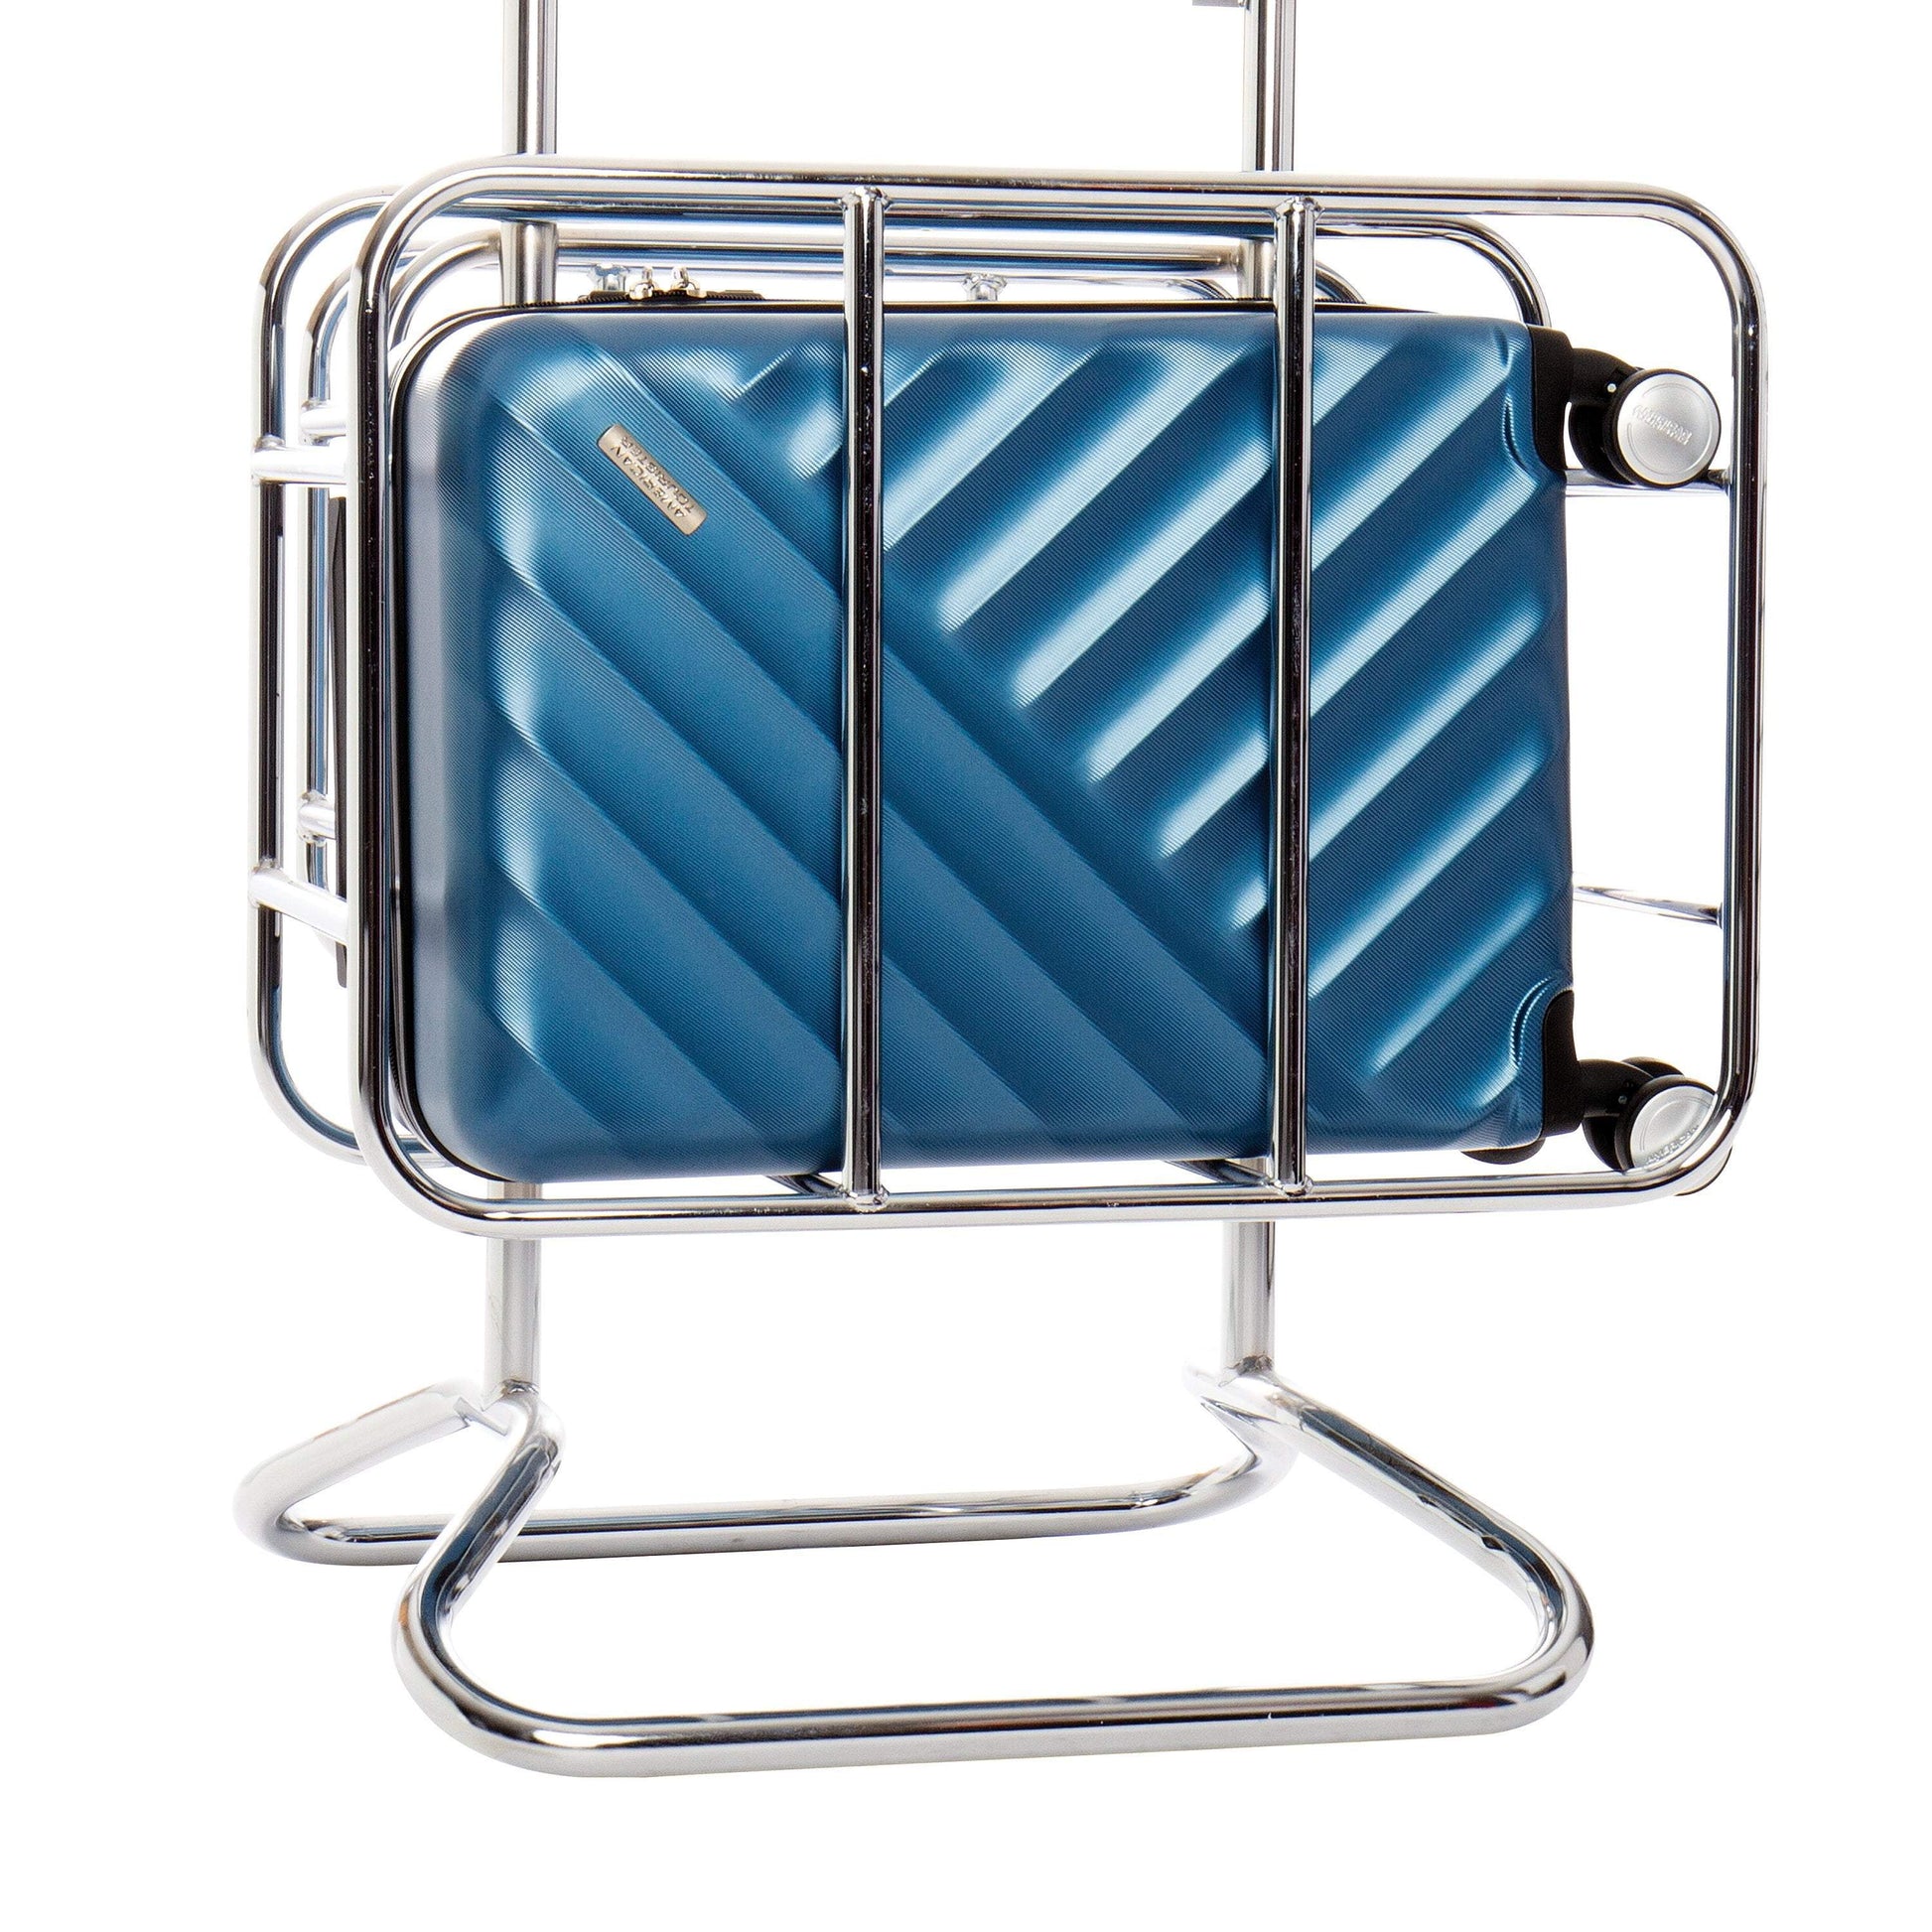 American Tourister Crave Collection Carry-On Spinner Luggage